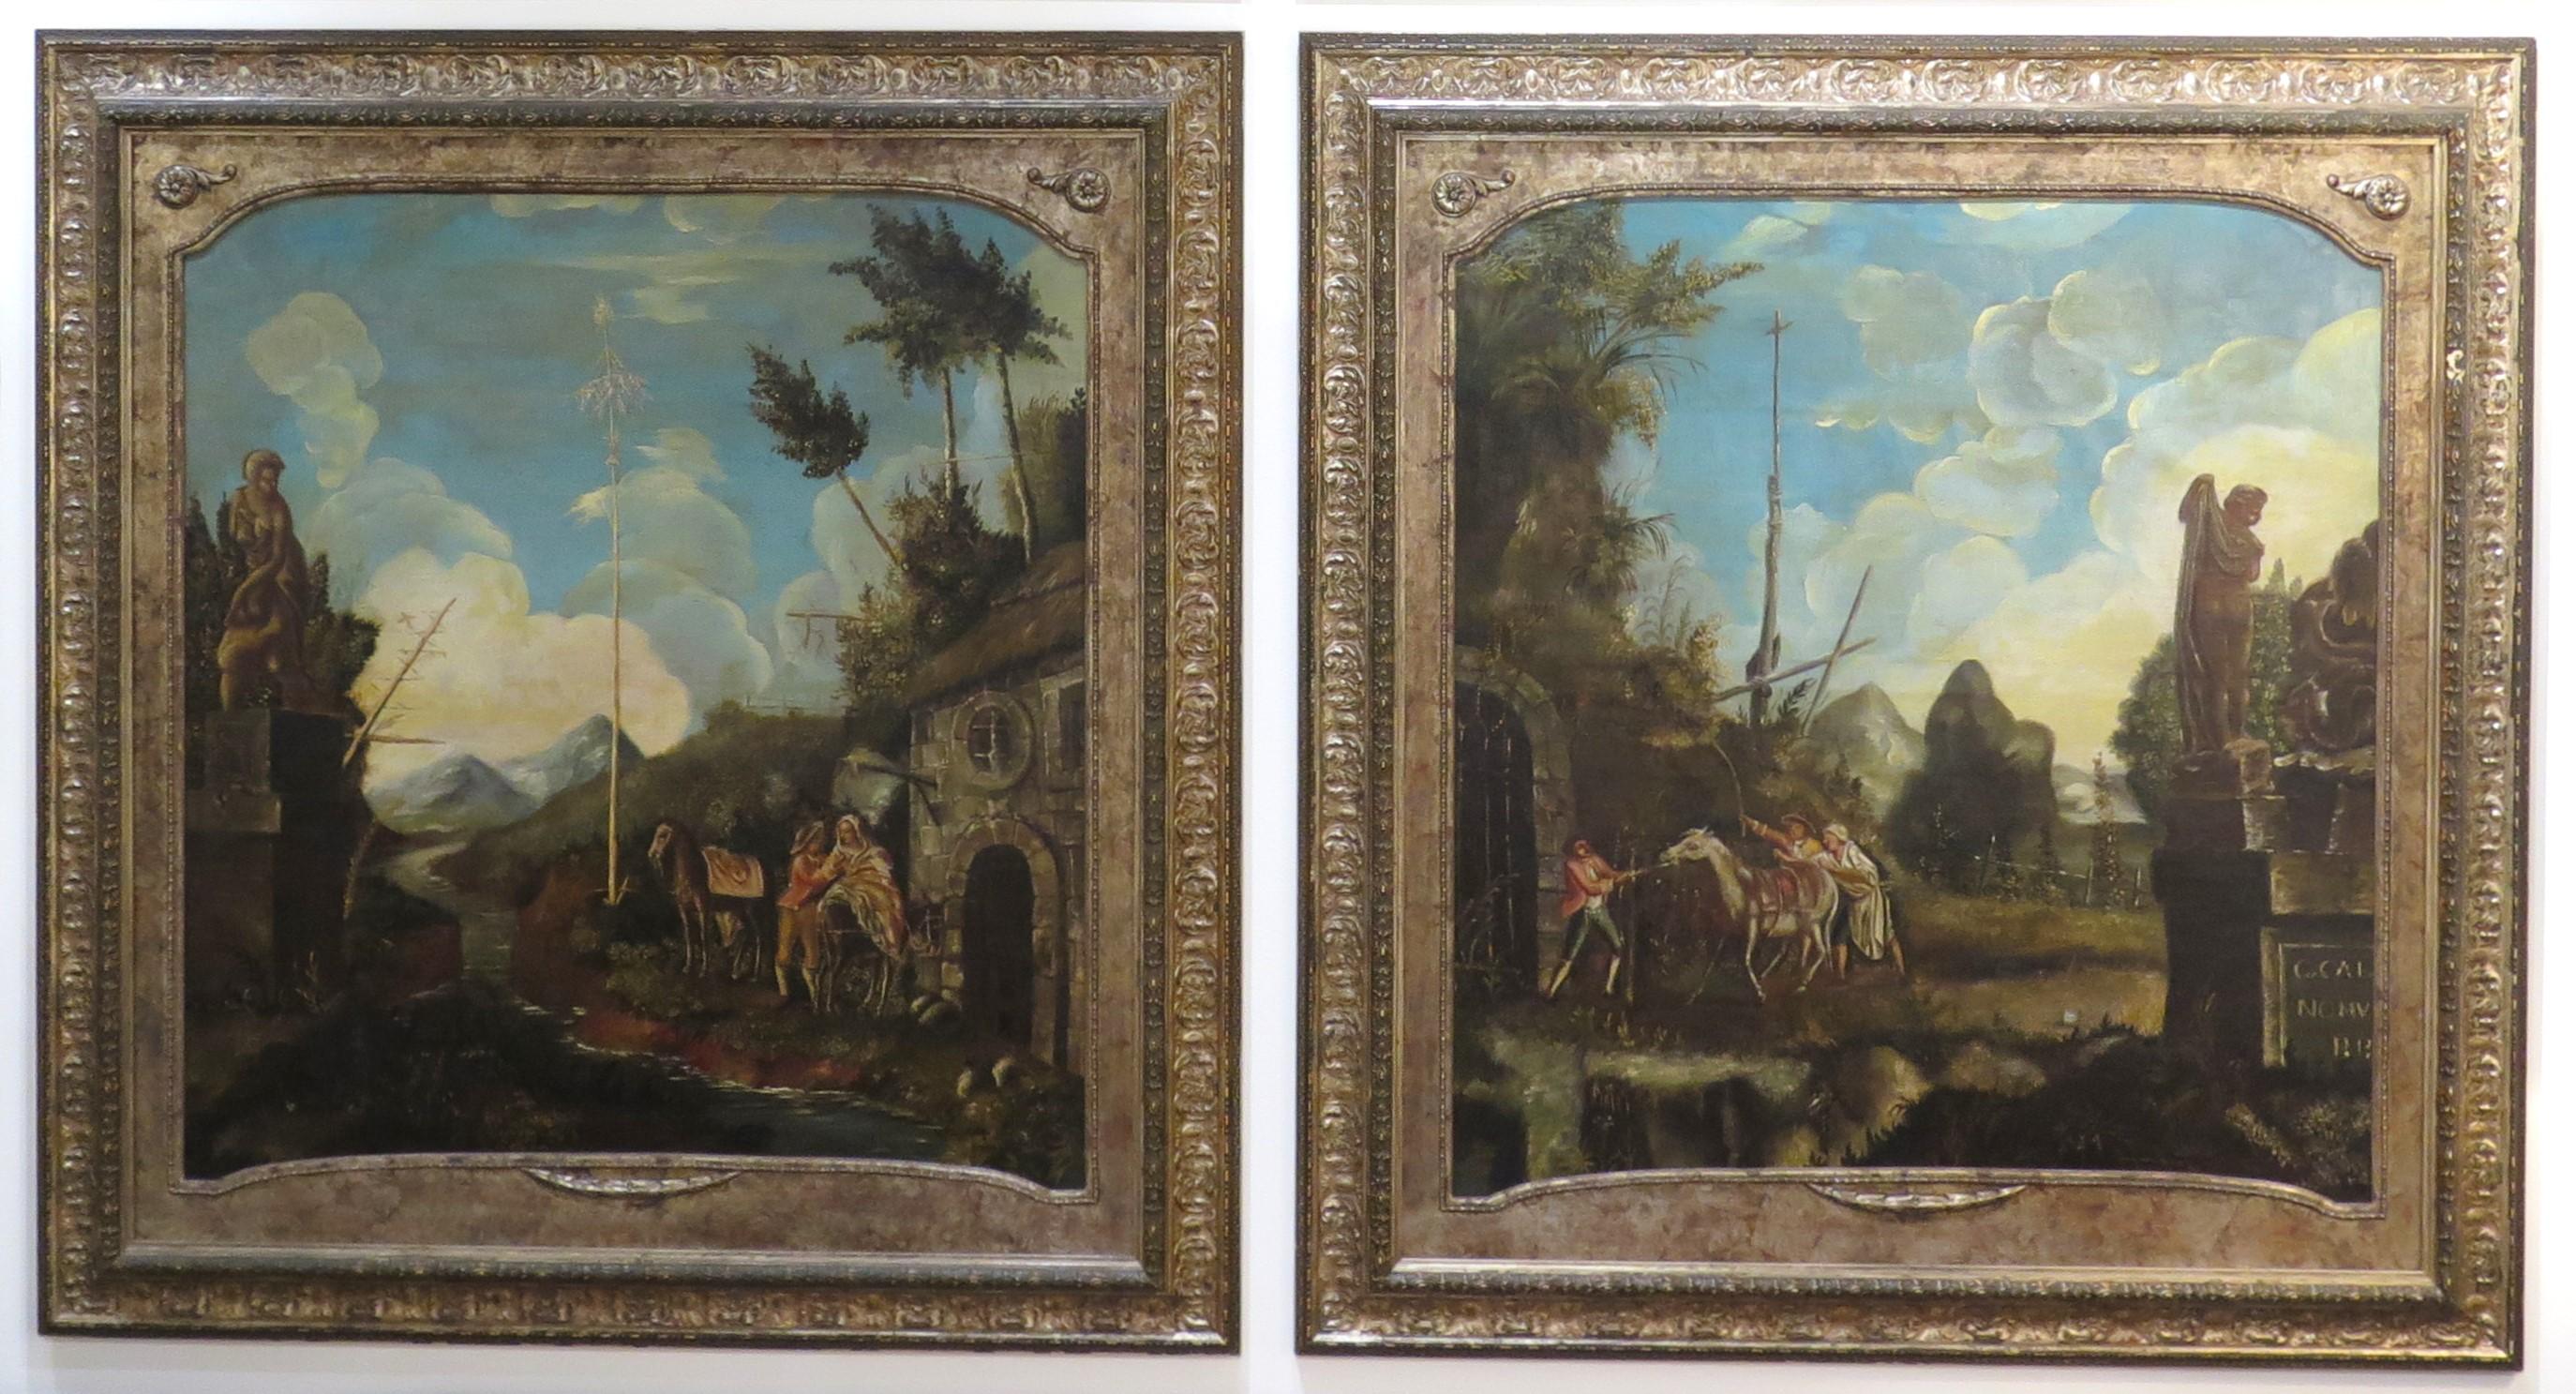 Neoclassical A Set of Four Late 18th Century / Early 19th Century Allegorical Paintings For Sale